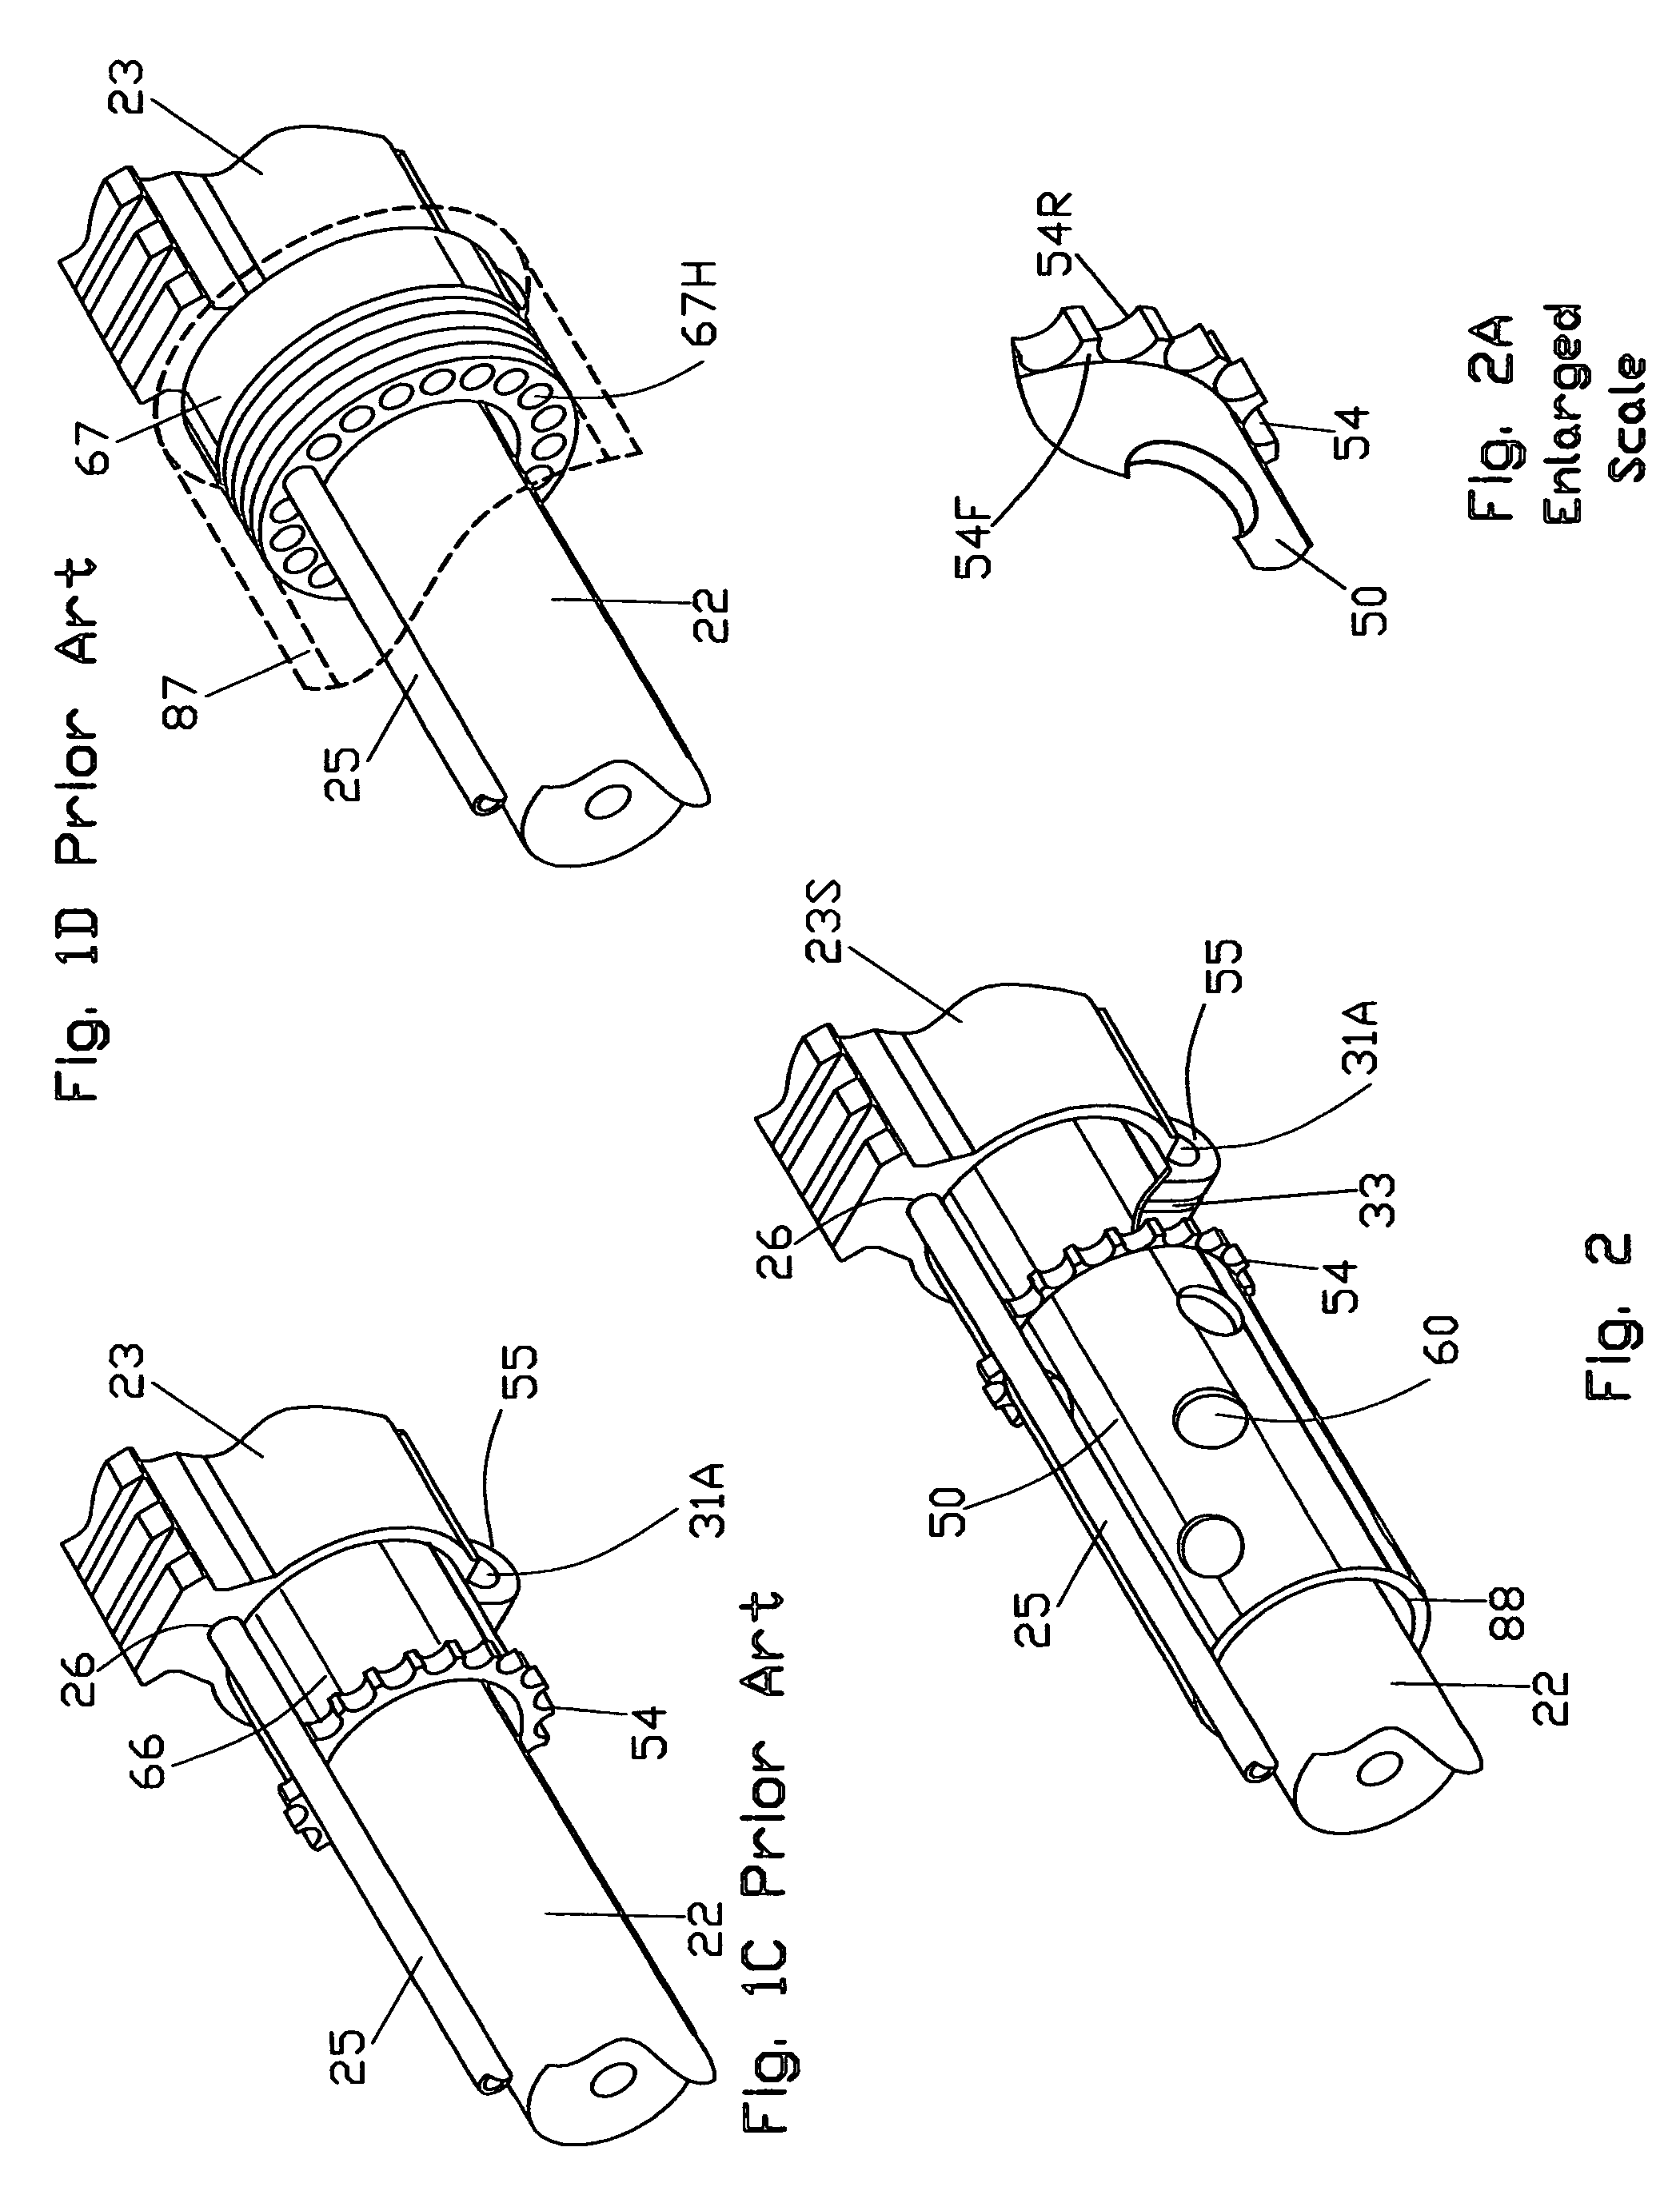 Handguard system integrated to a firearm